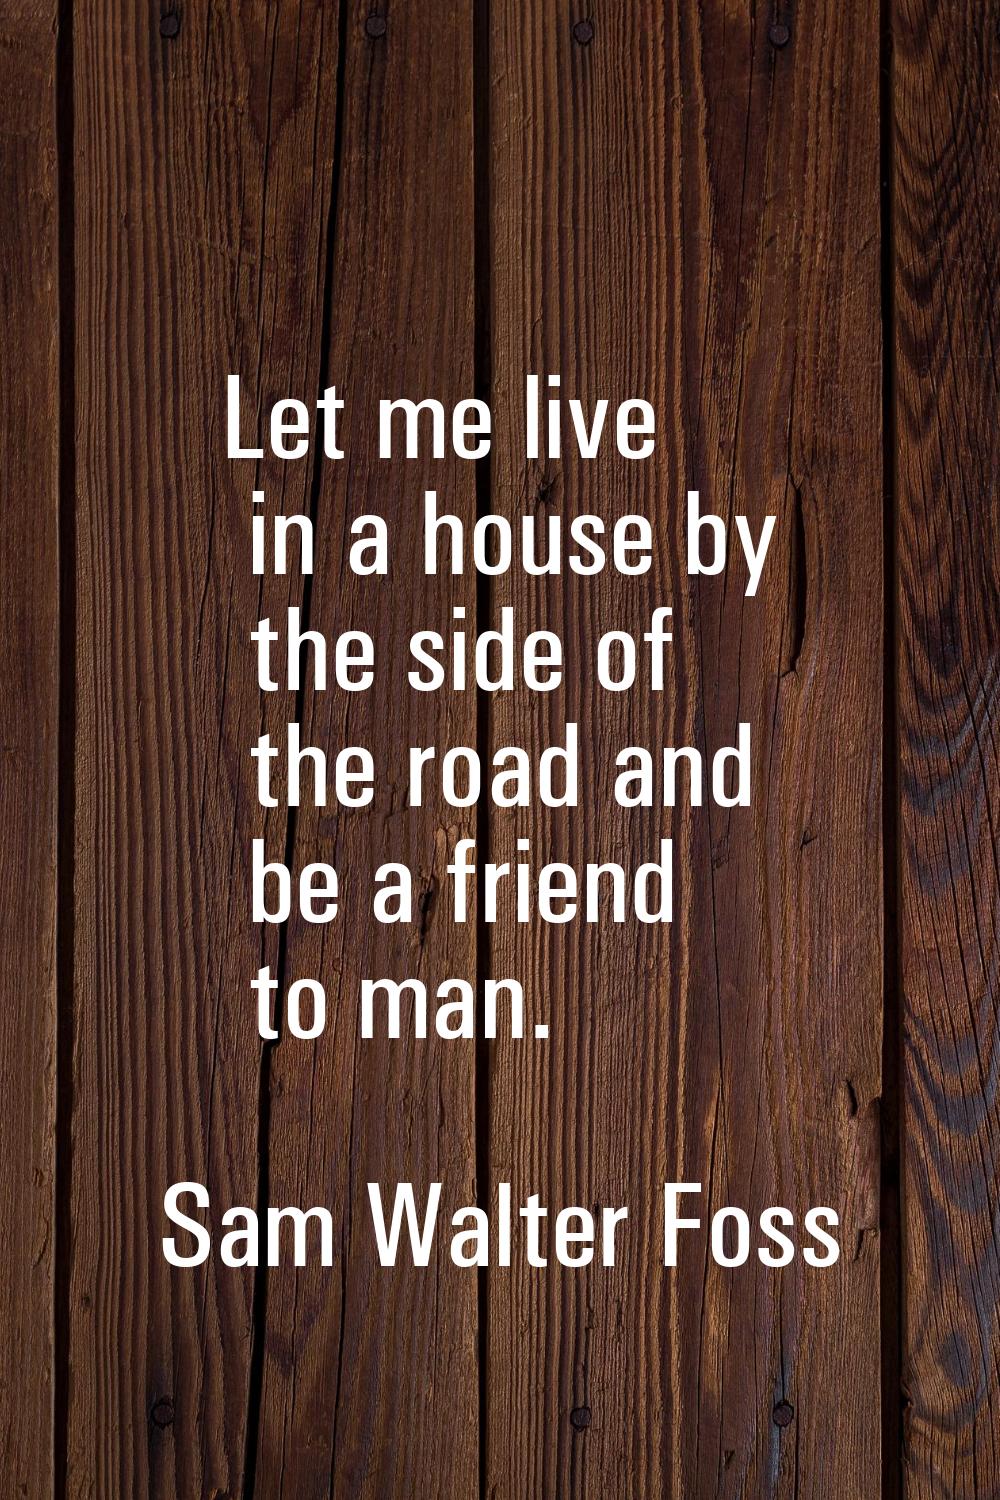 Let me live in a house by the side of the road and be a friend to man.